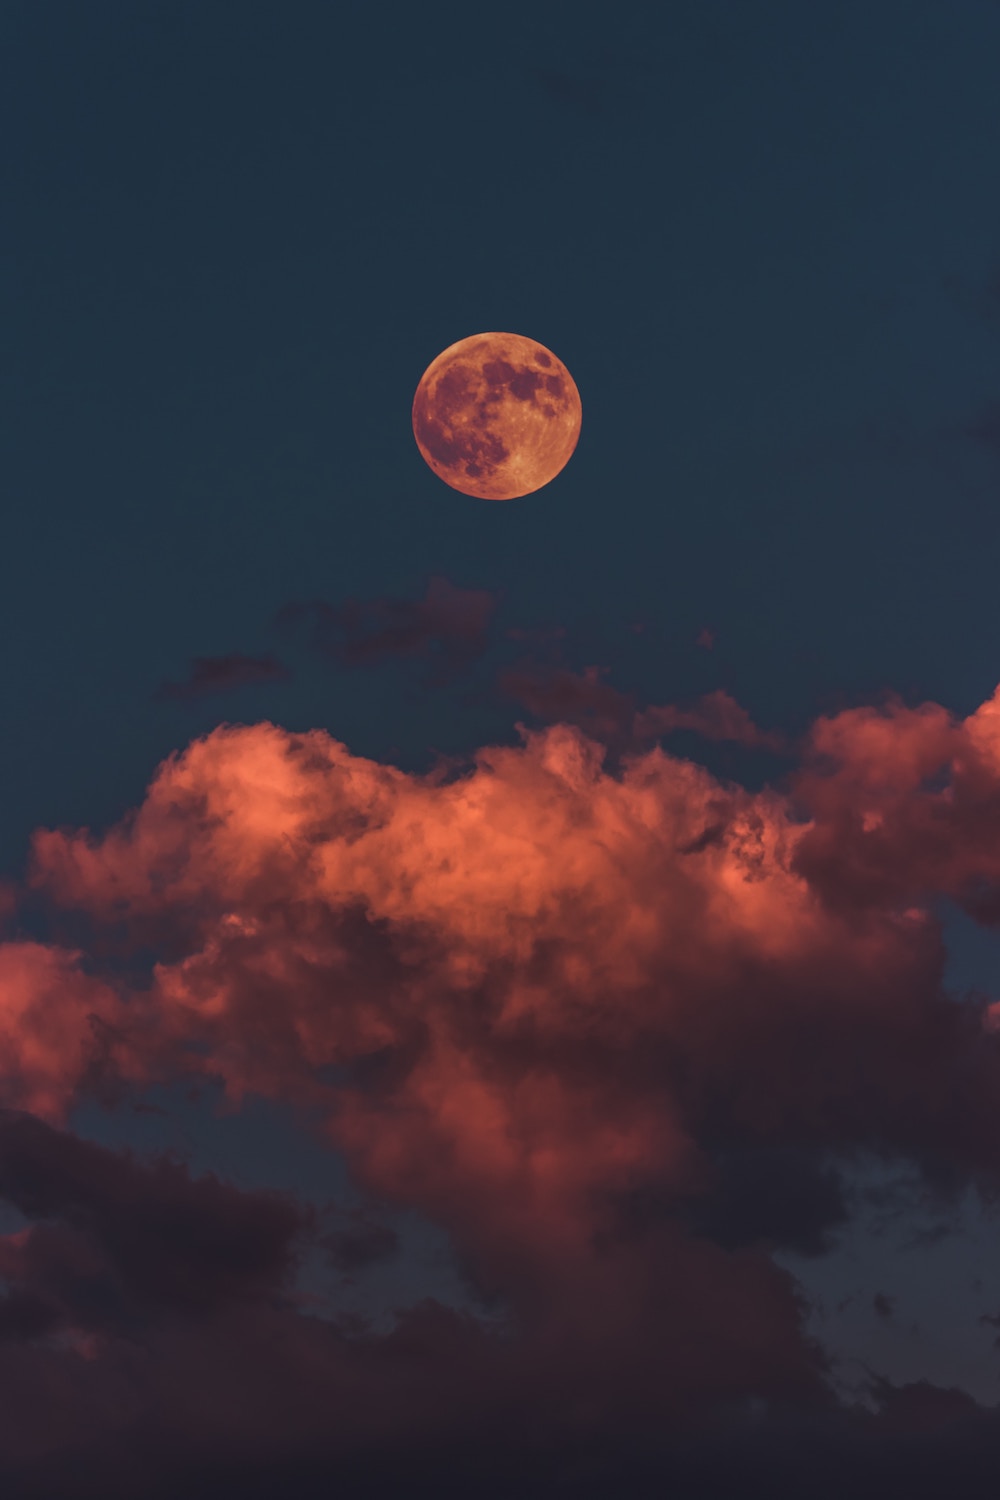 full moon above red clouds on a dark night sky